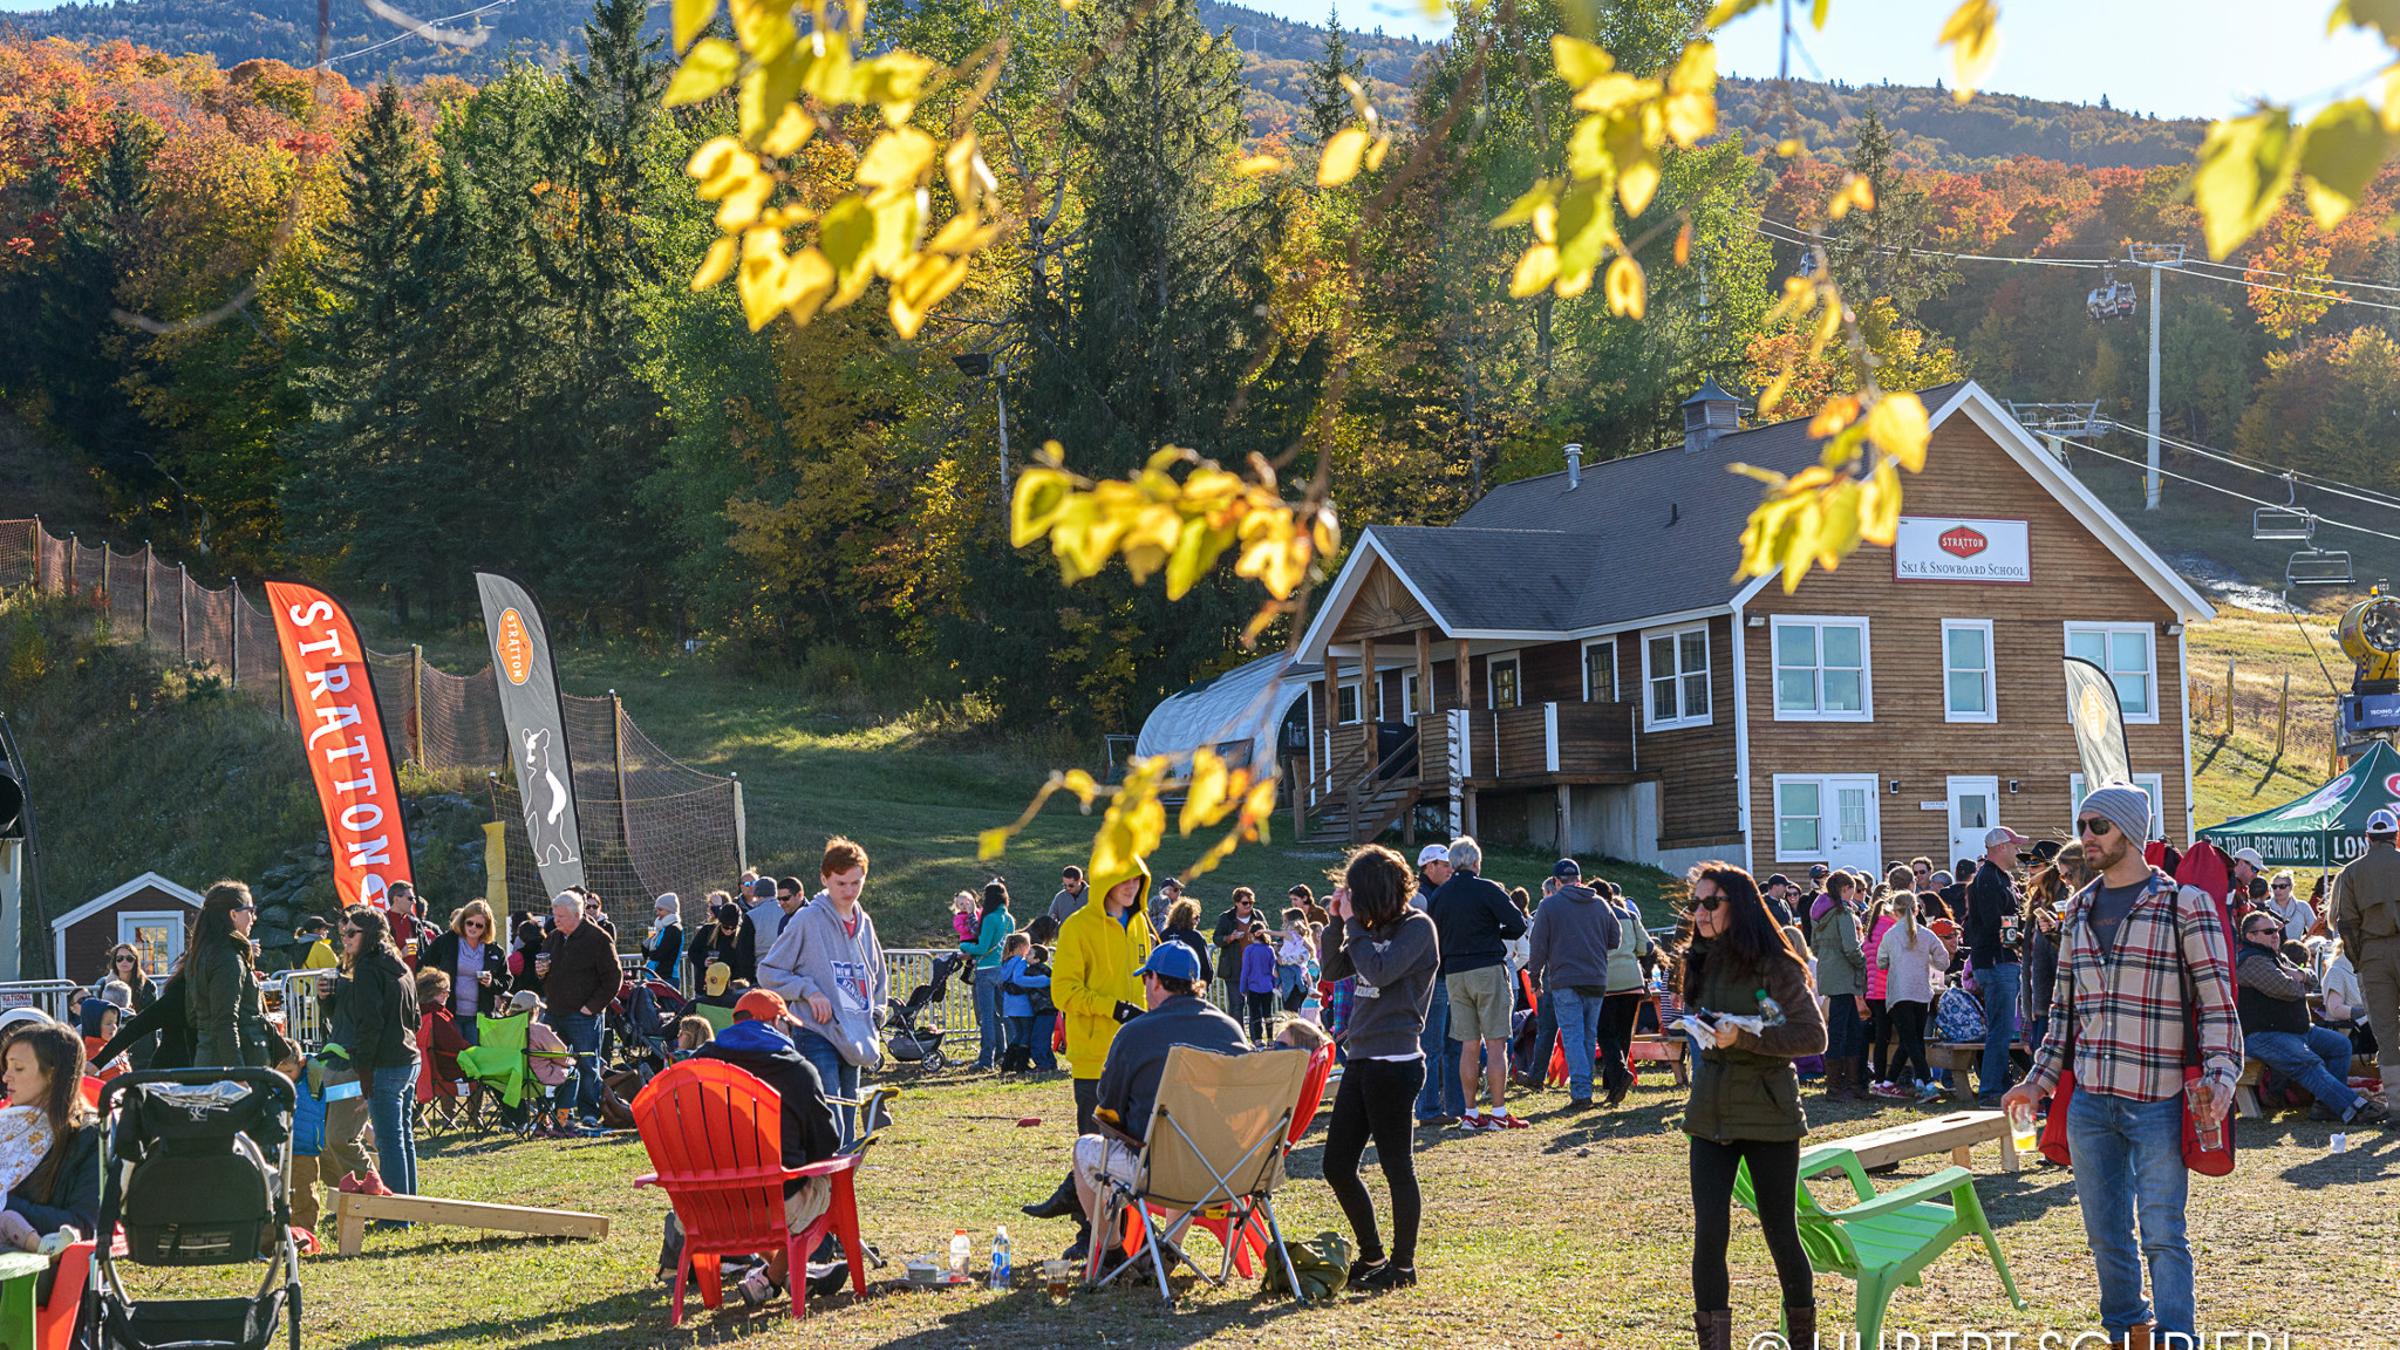 Past Events at Stratton Mountain in Vermont